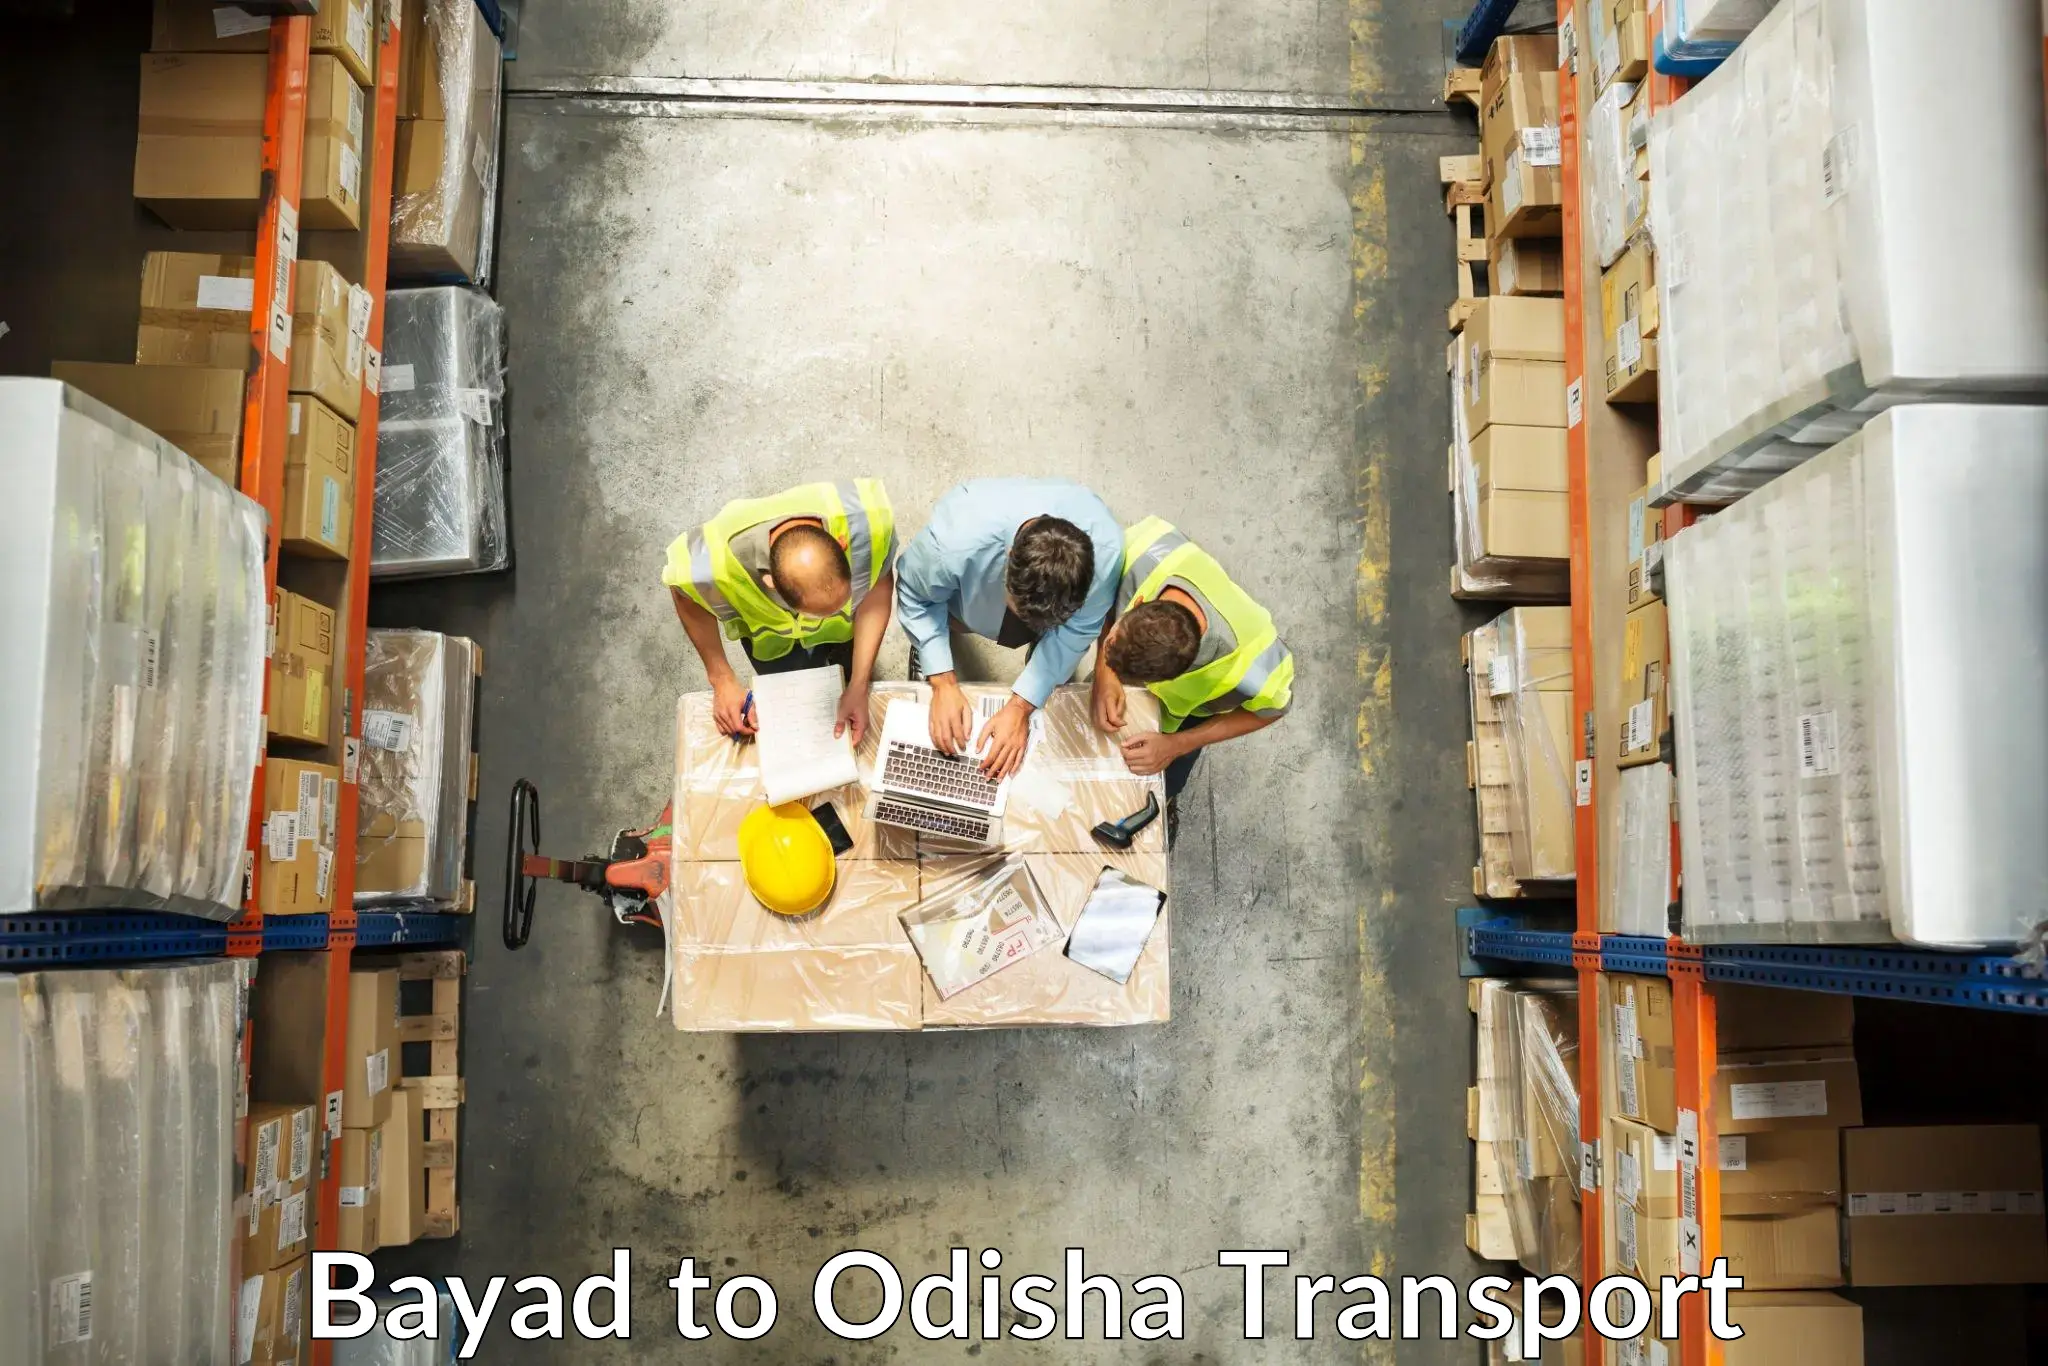 Truck transport companies in India Bayad to Riamal